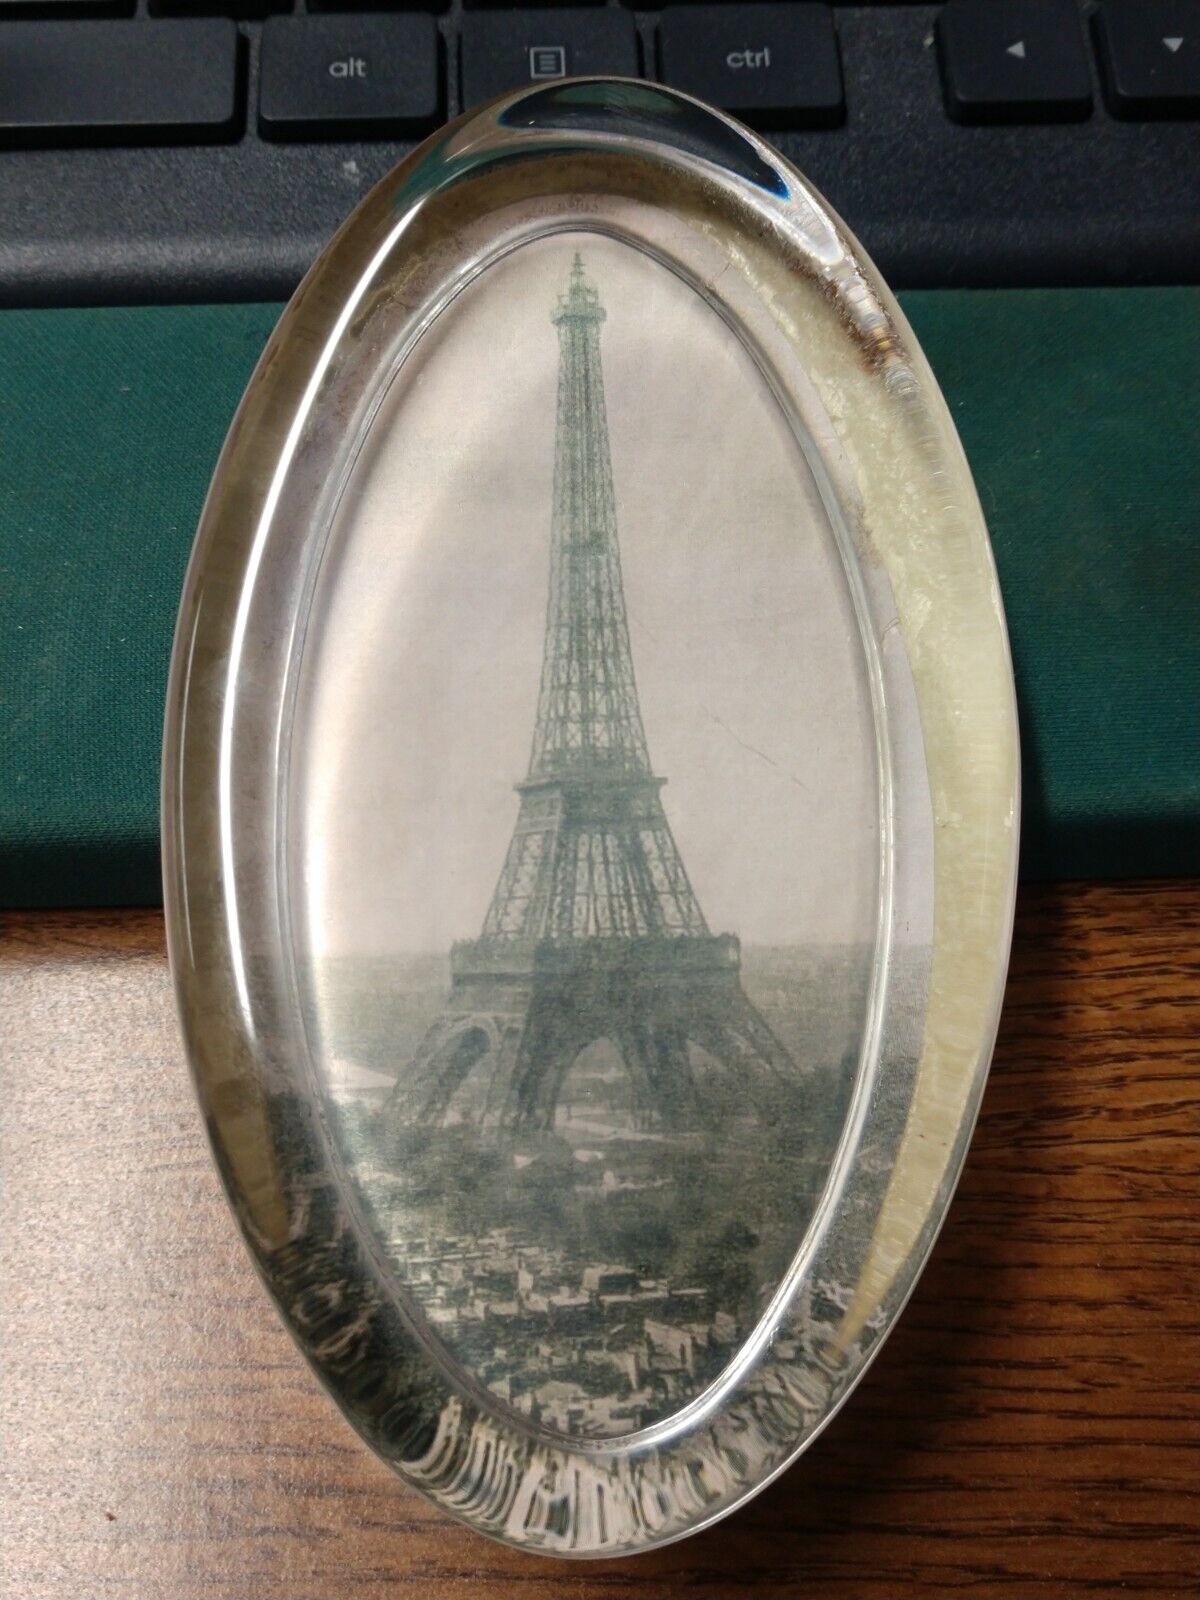 VINTAGE EARLY EIFFEL TOWER PARIS FRANCE FELT BACK OVAL GLASS PAPER WEIGHT